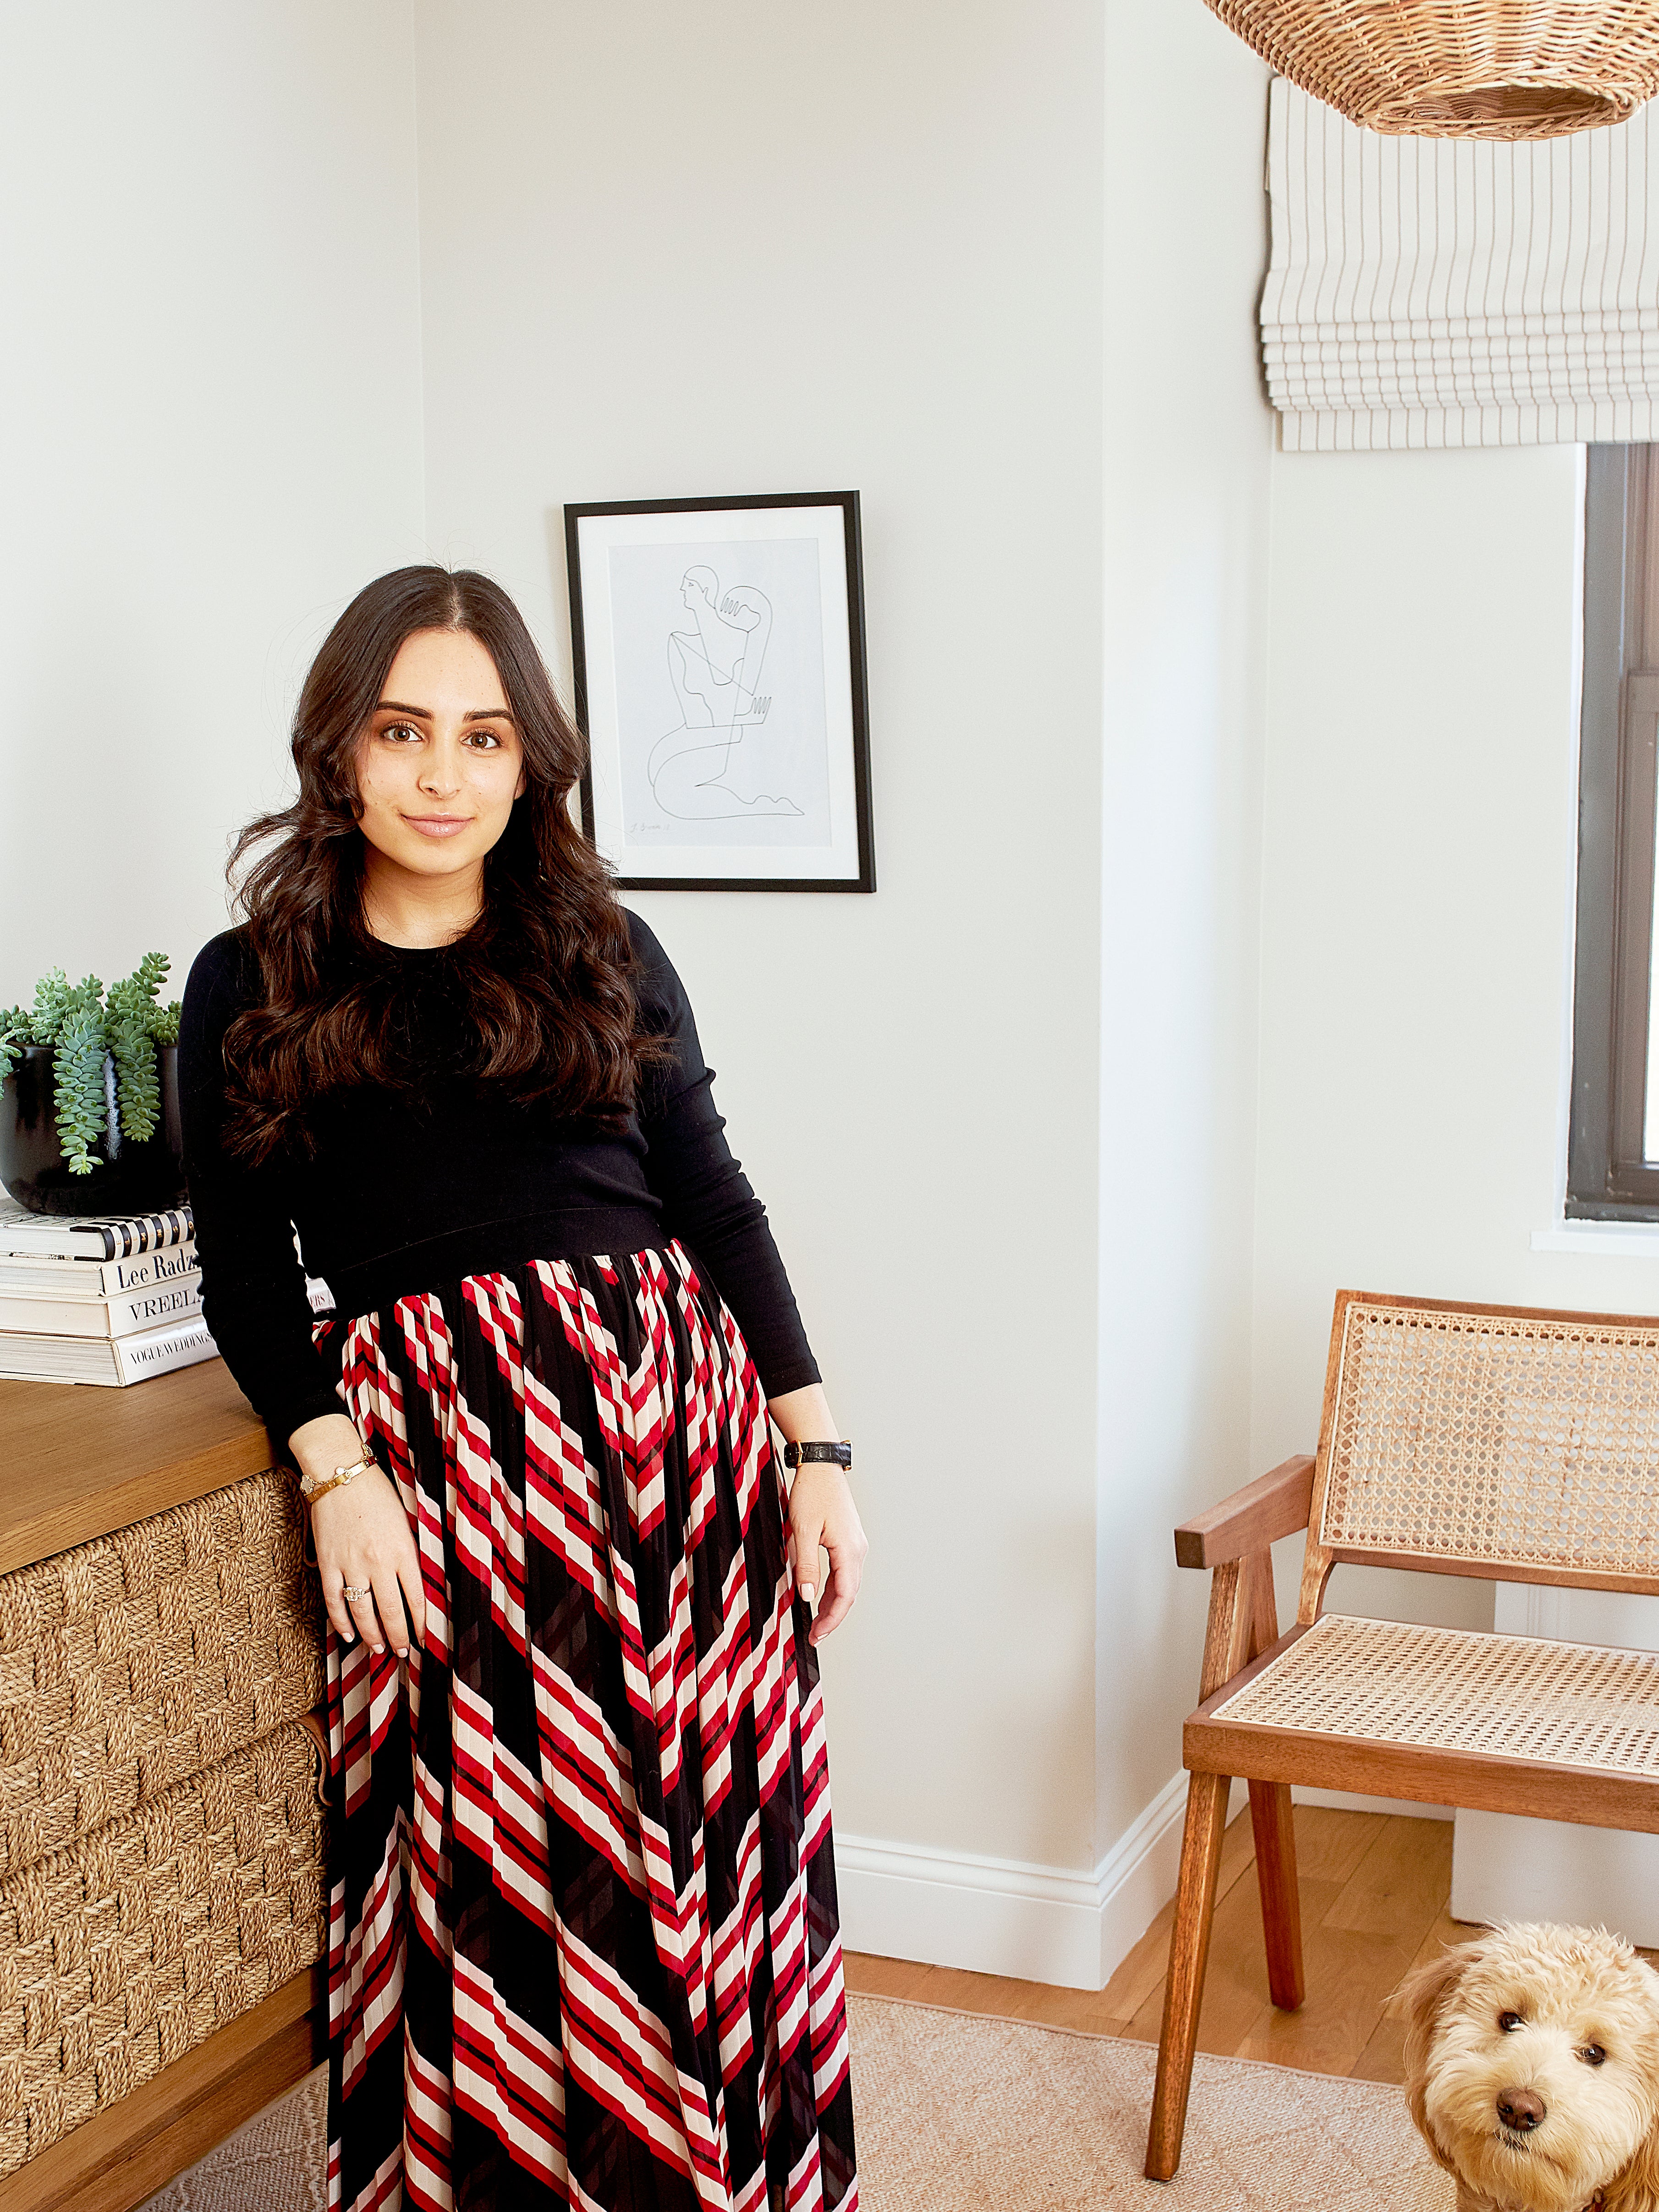 Interior Designer Ariel Okin Proves That White Walls Are Anything But Boring